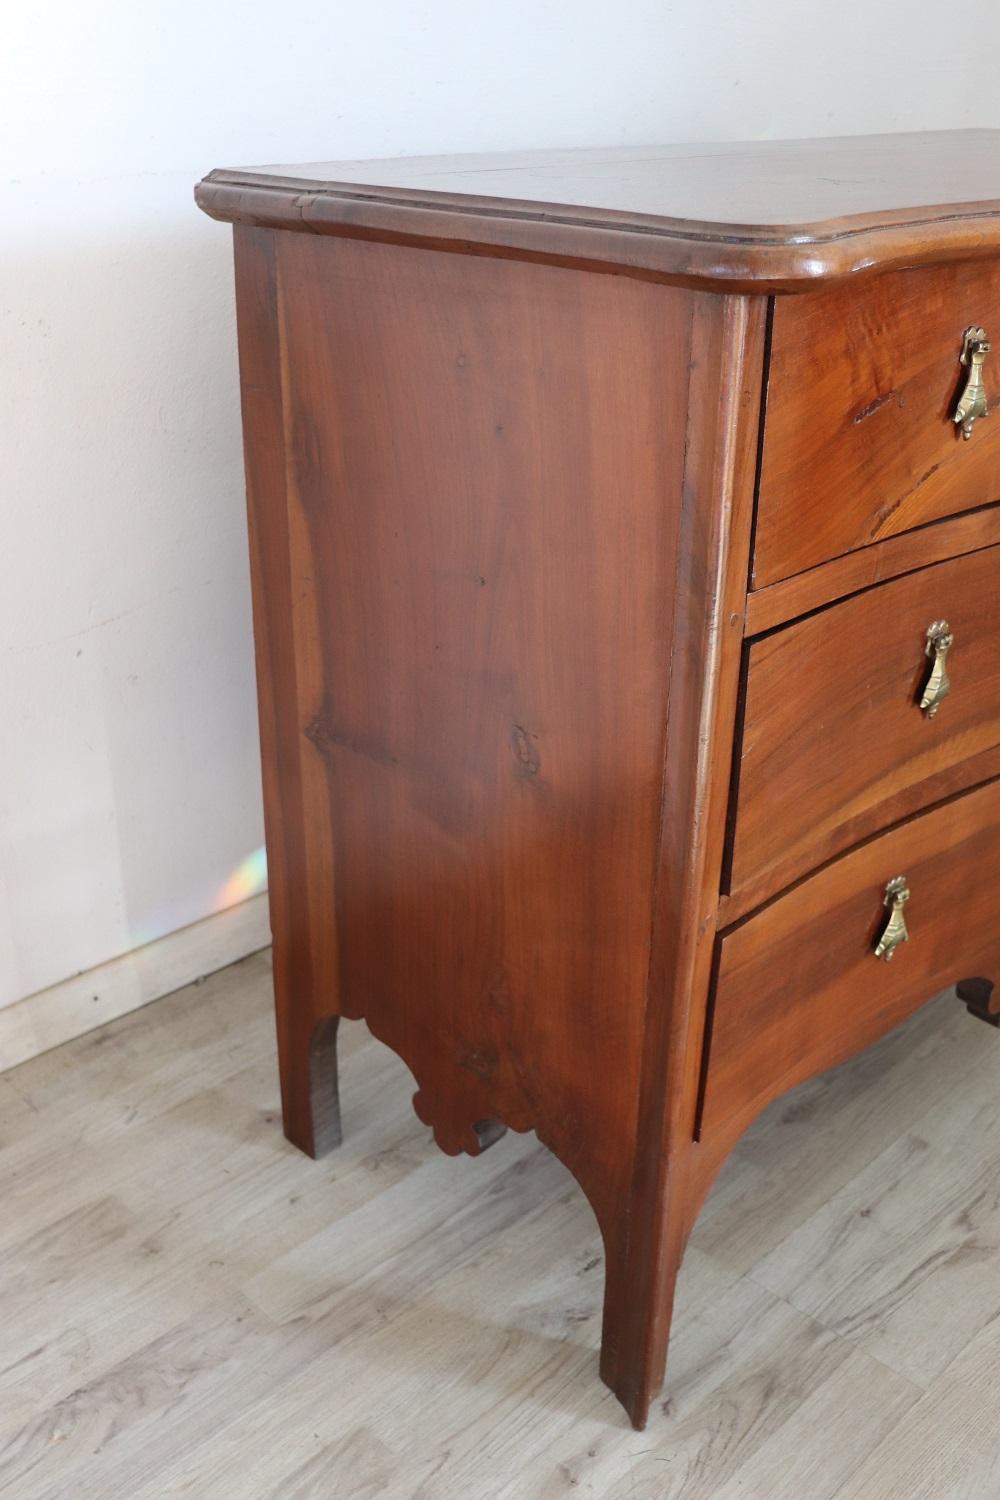 Mid-18th Century 18th Century Italian Louis XV Walnut Antique Commode or Chest of Drawers For Sale